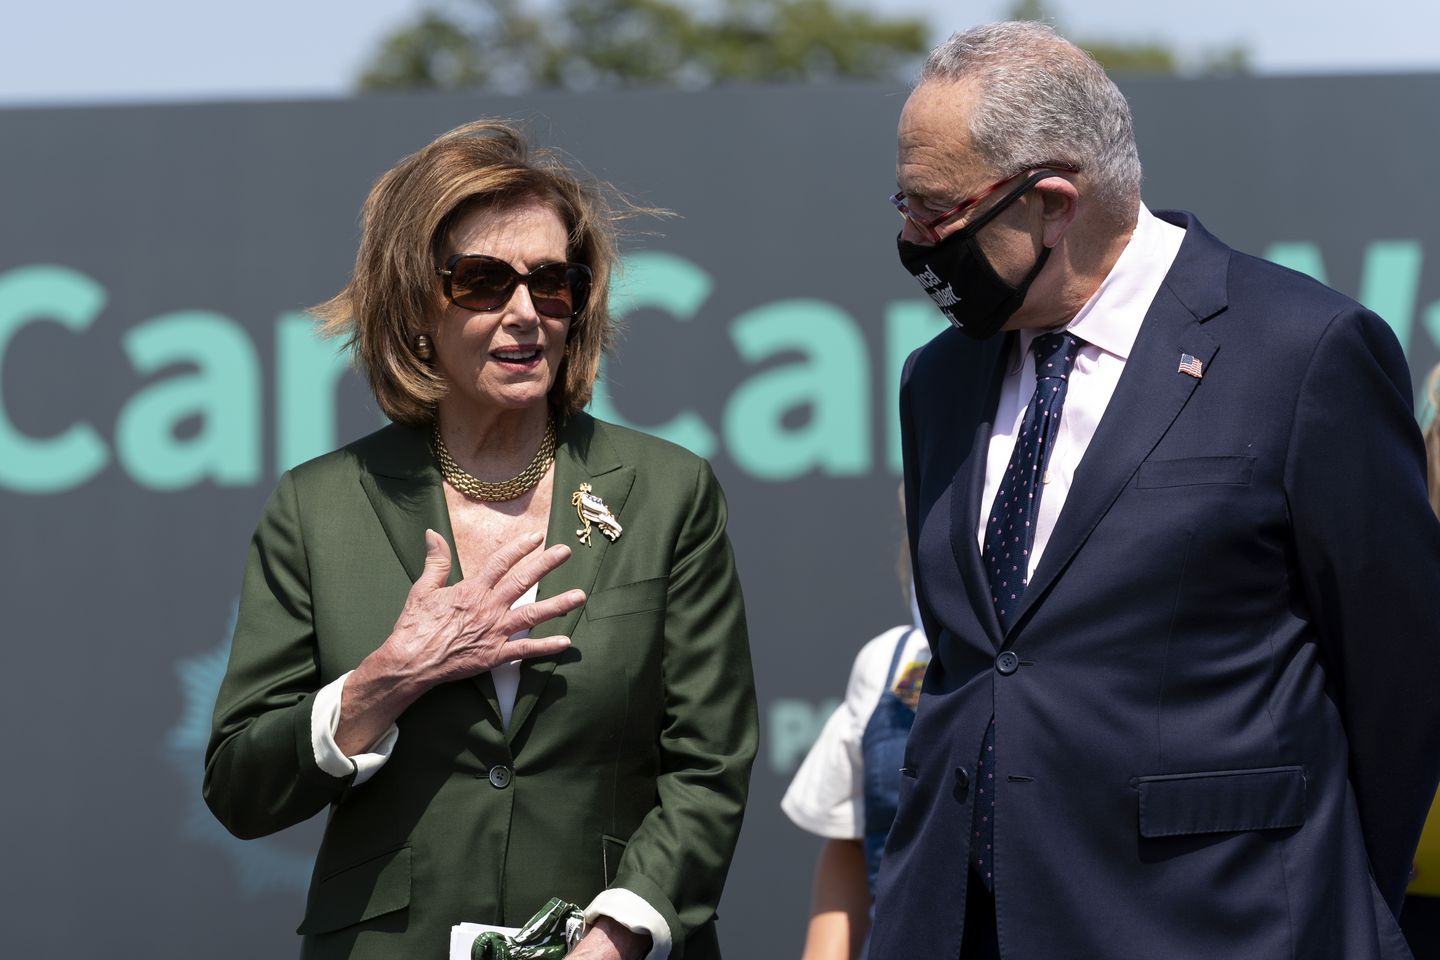 Pelosi, Schumer watch support nose-dive among Black, Hispanic voters